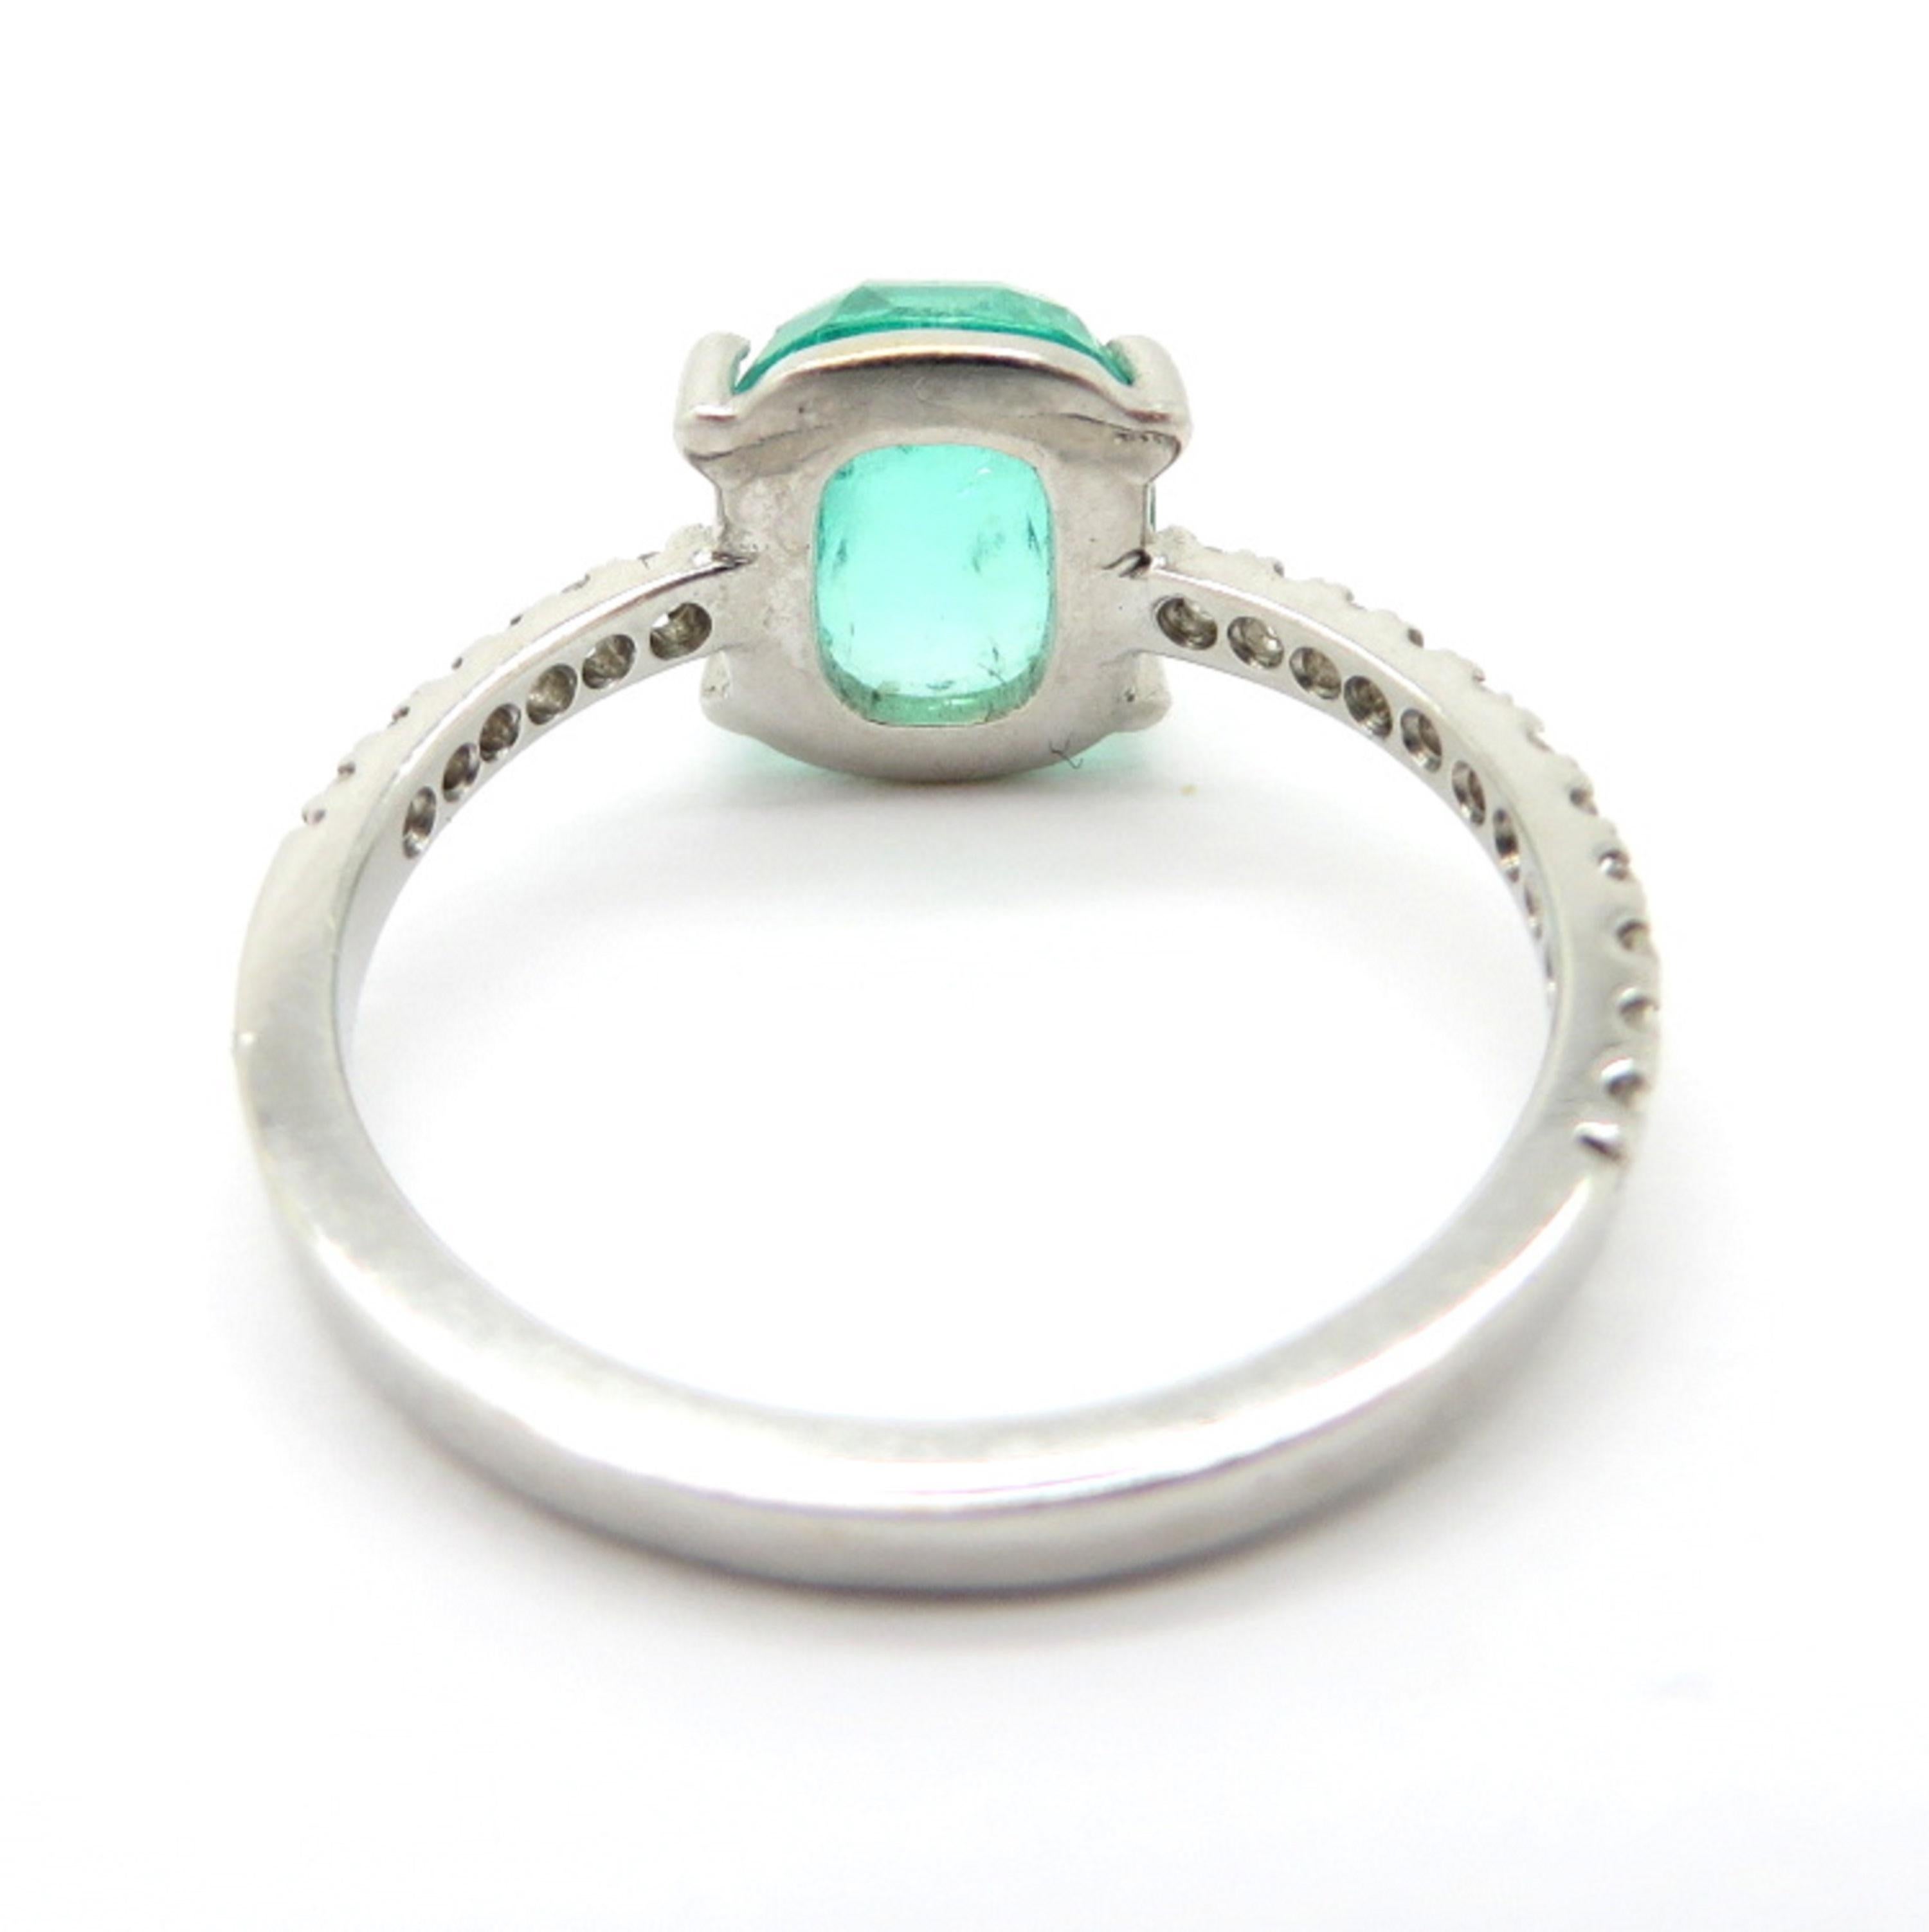 Estate 18 Karat White Gold 2.64 Carat Columbian Emerald and Diamond Ring In Excellent Condition For Sale In Scottsdale, AZ